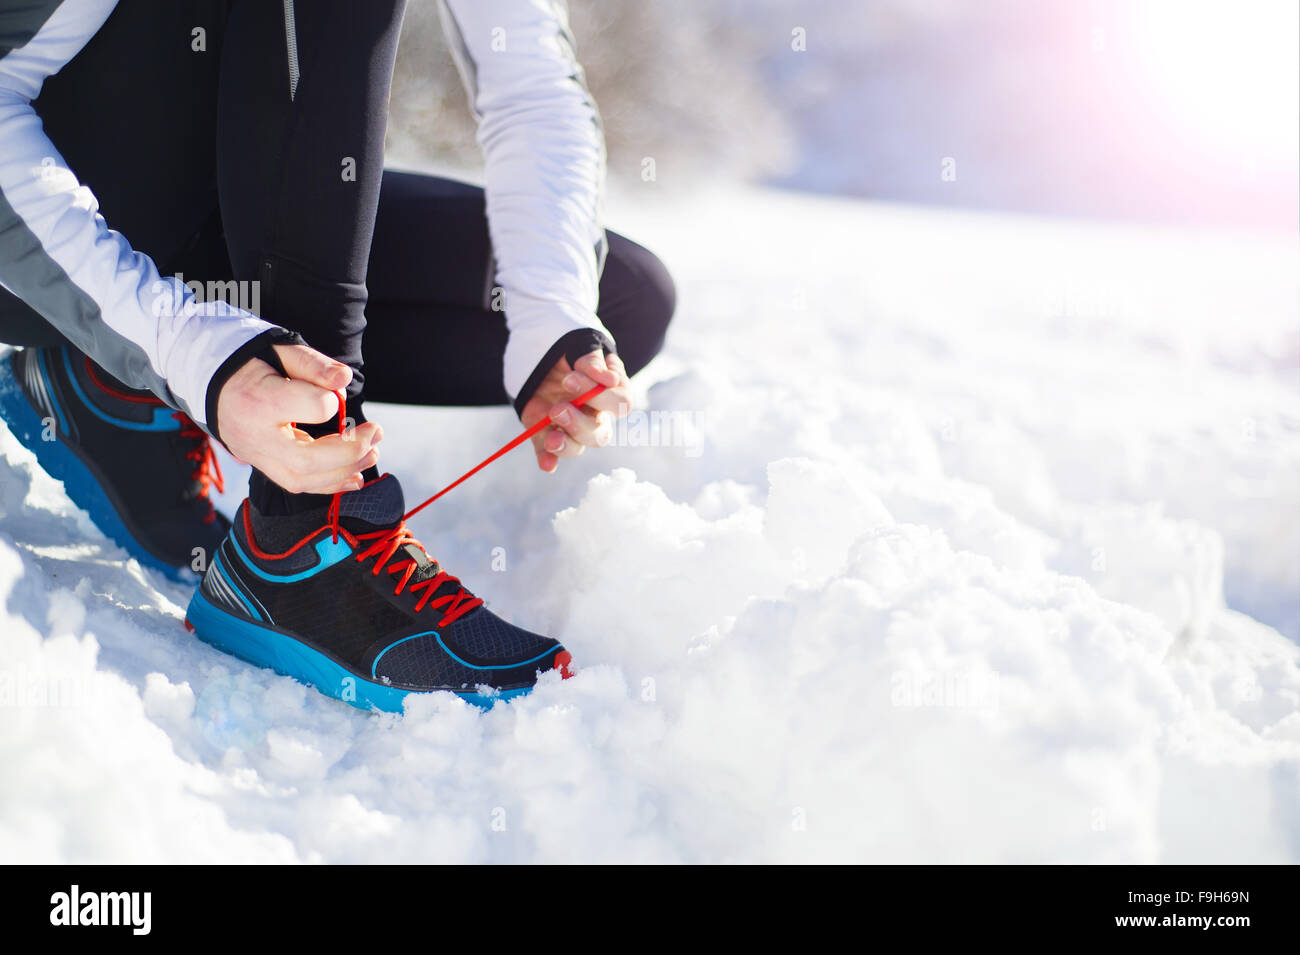 Legs of young sportsman jogging outside in a winter park Stock Photo